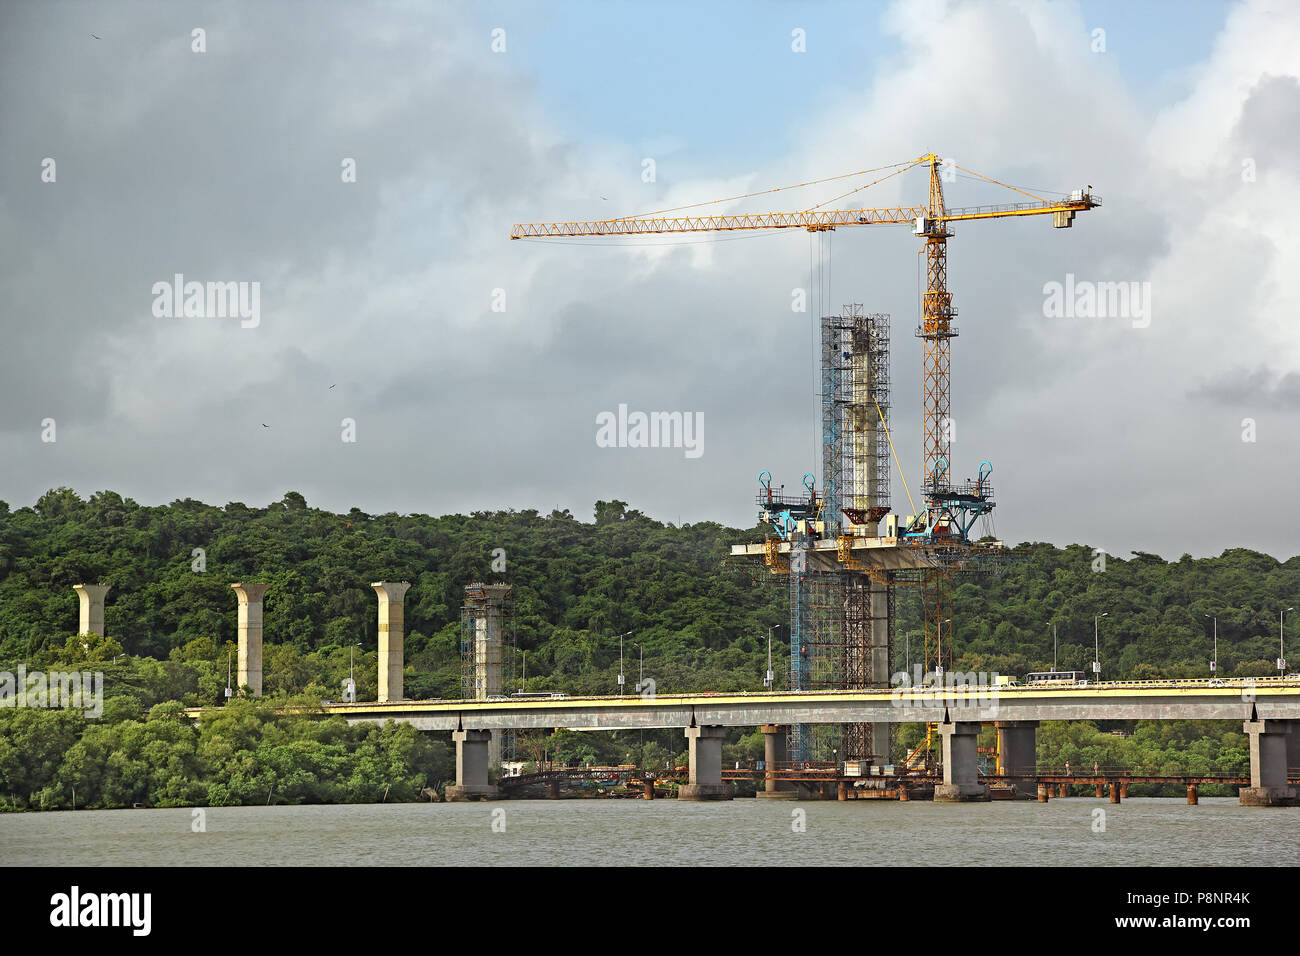 Tall concrete columns and deck being erected using tower crane and other equipment for the third bridge across Mandovi River in Goa, India Stock Photo